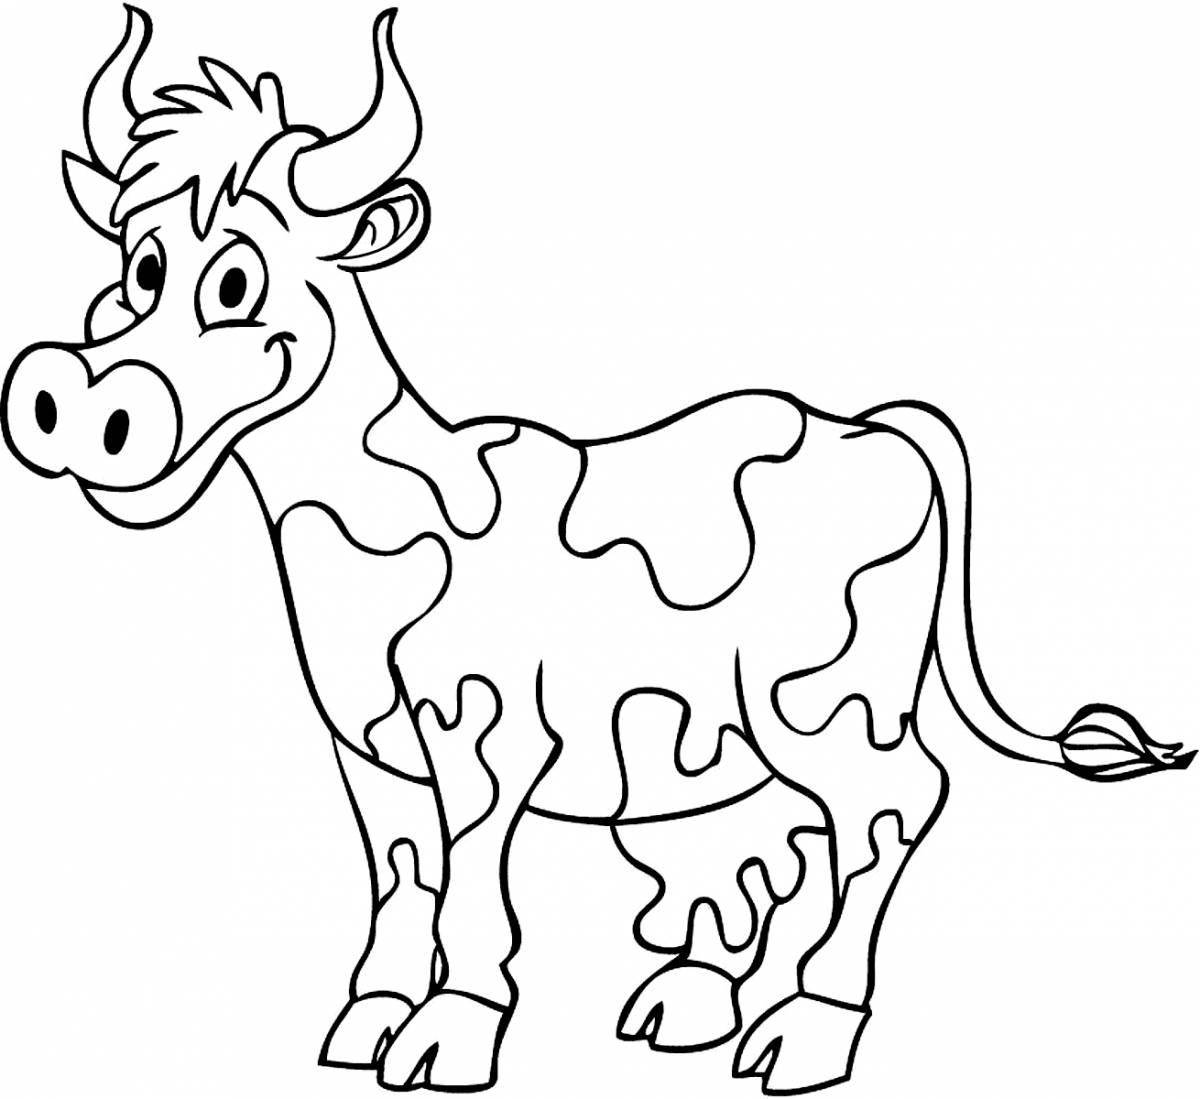 Coloring playful cow